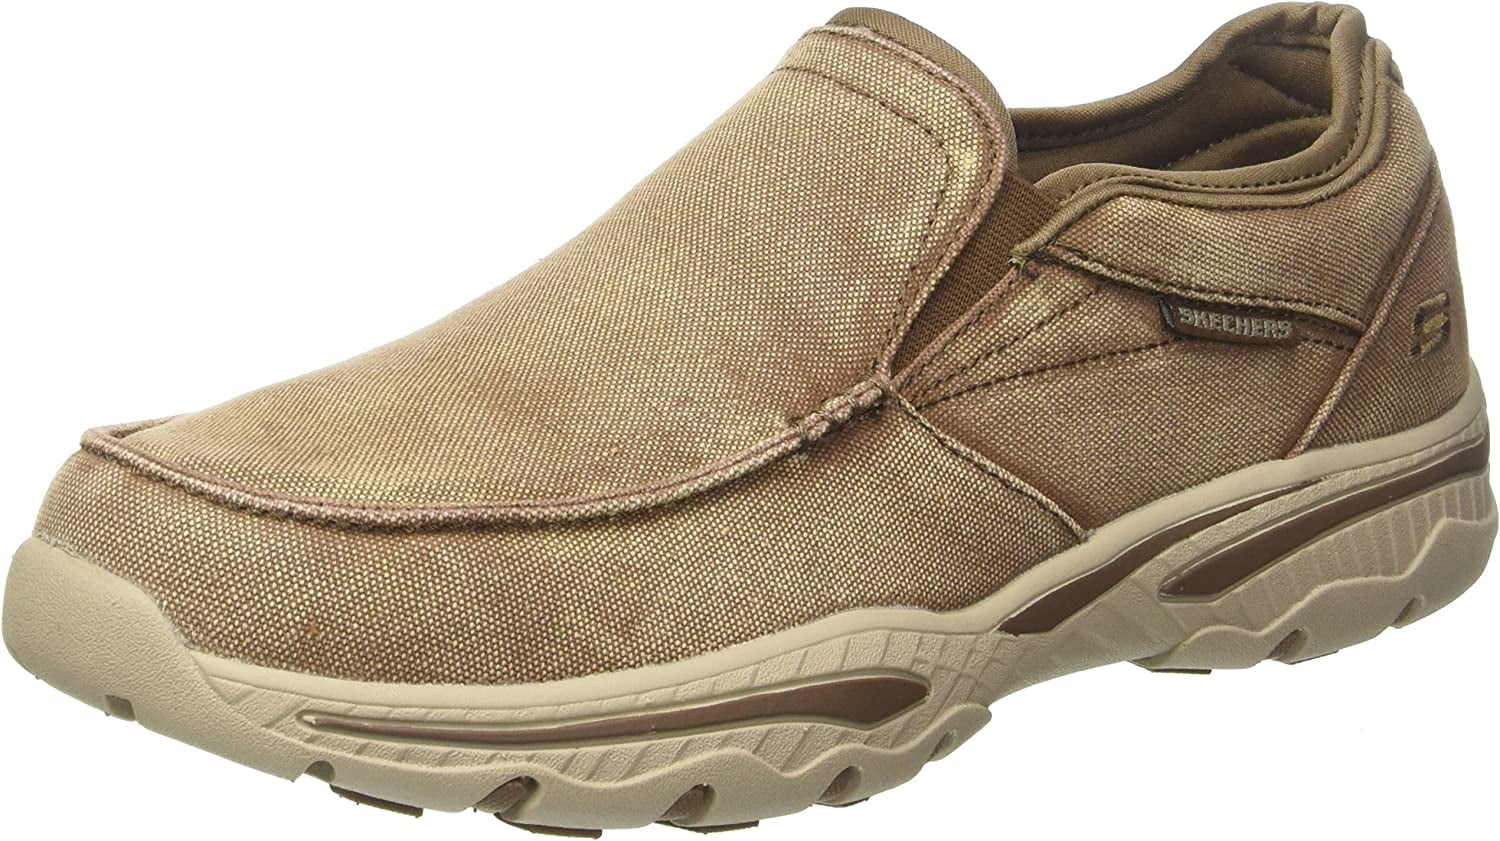 Skechers Men's Relaxed Fit-Creston-Moseco Moccasin, Light Brown, 13 US - Walmart.com